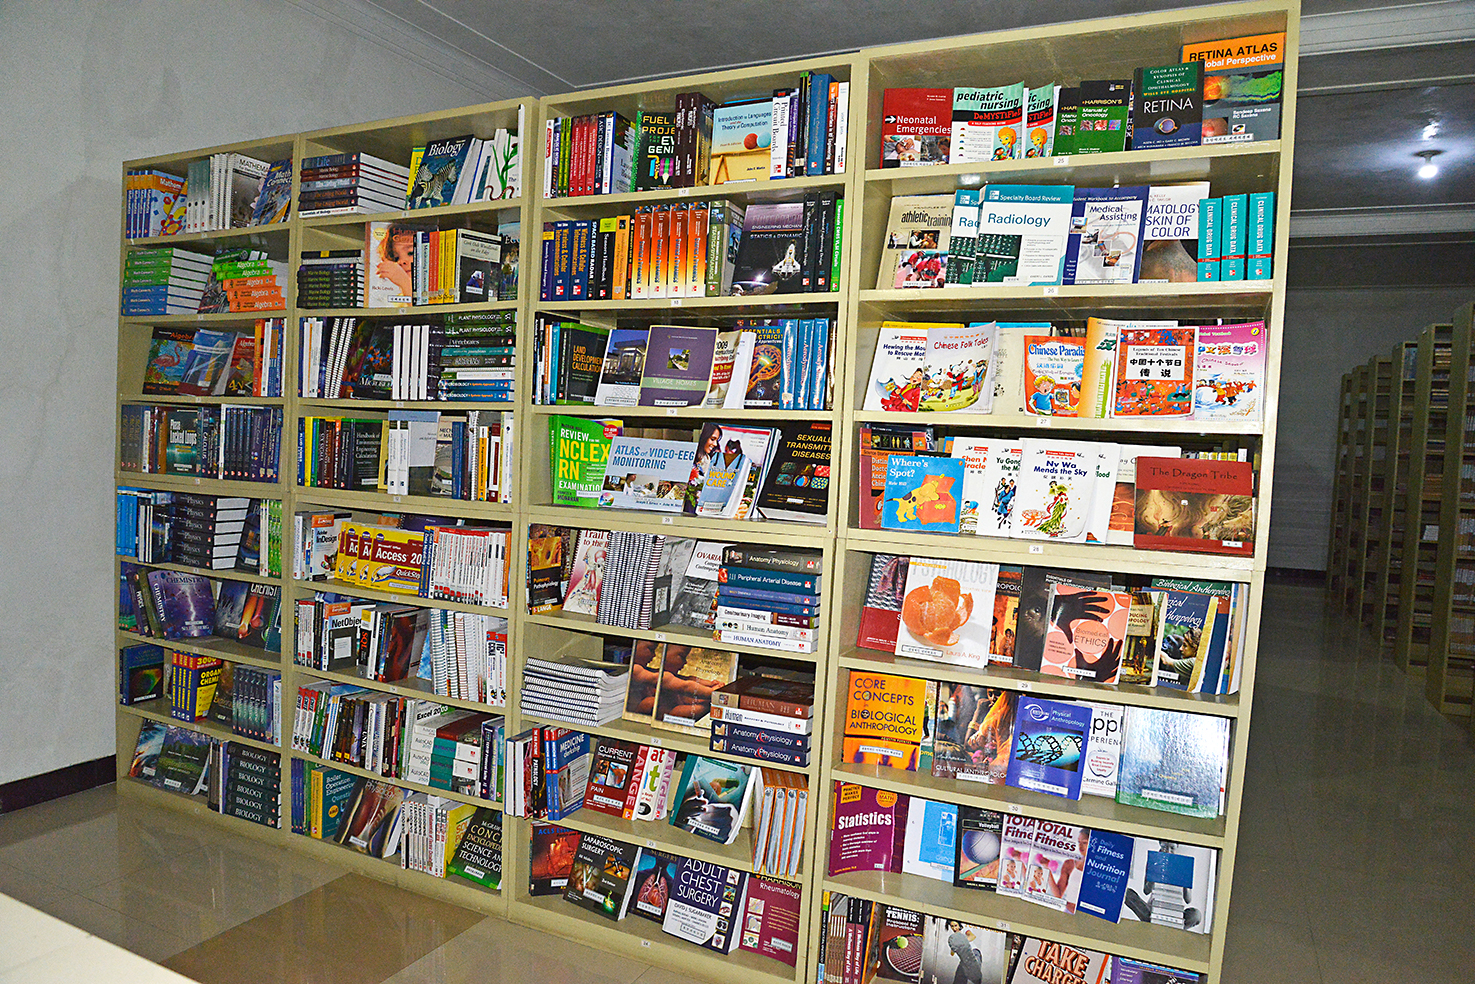 23 People´s Library